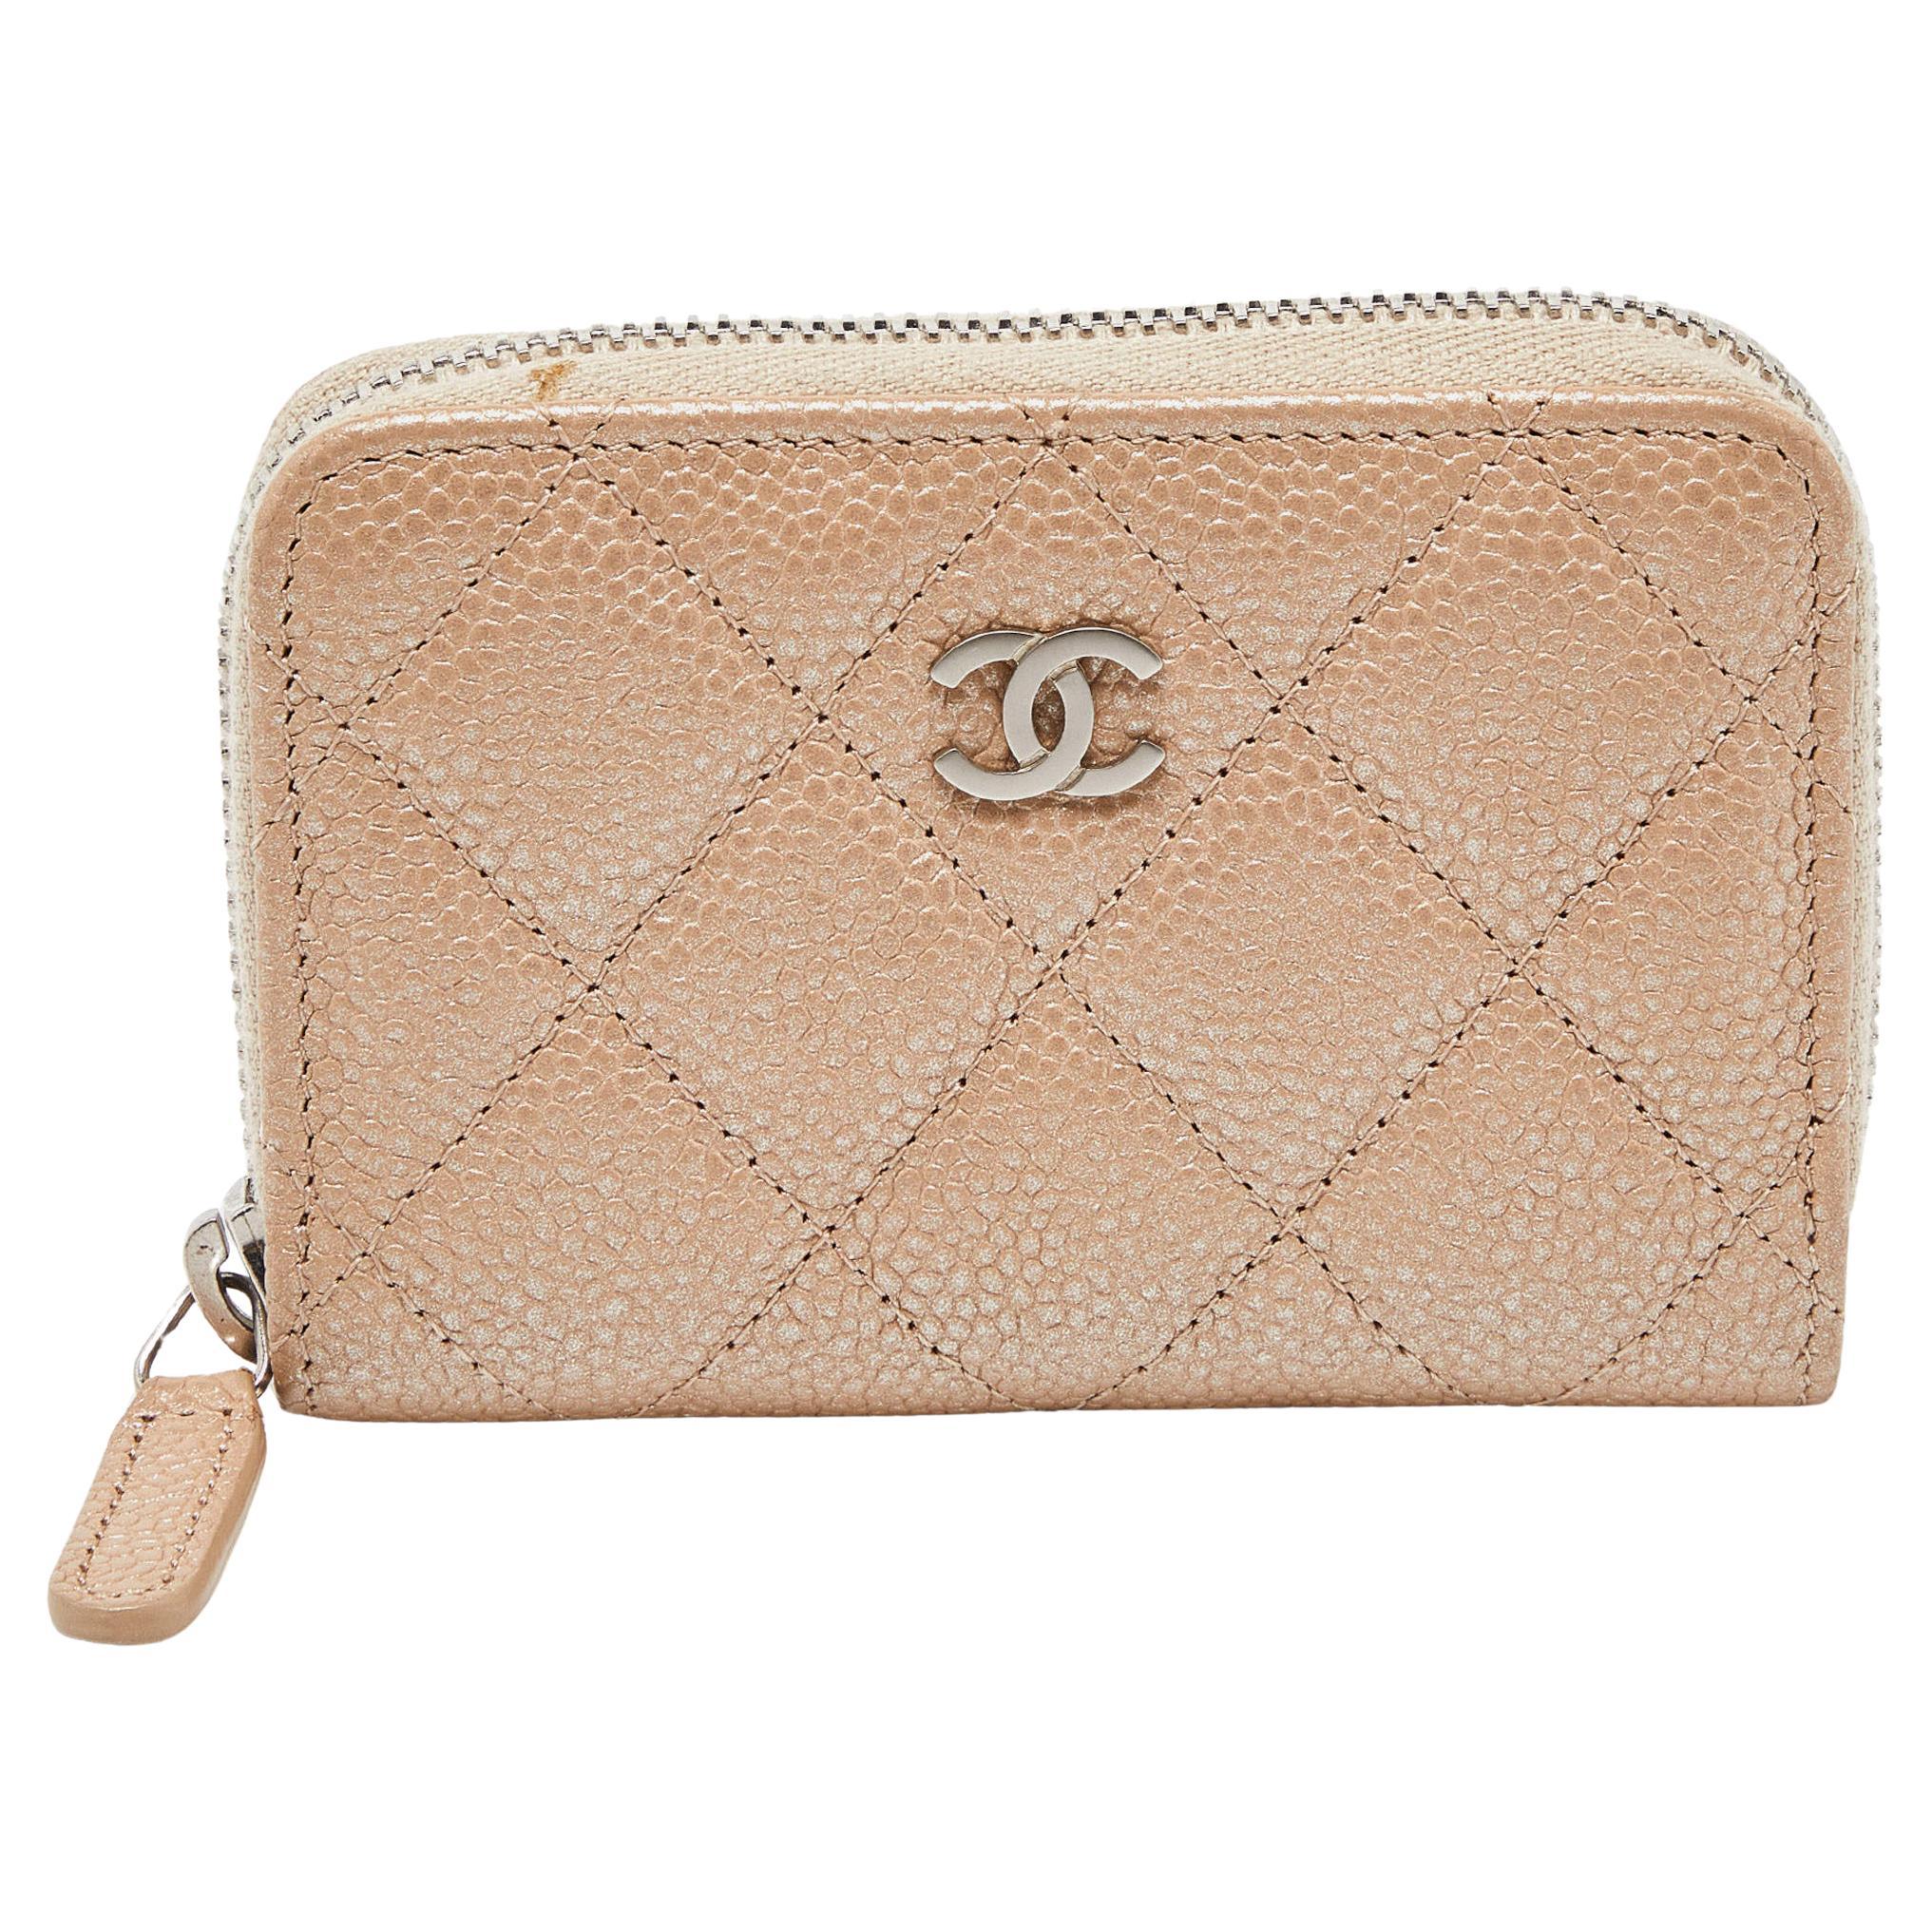 Chanel Beige Quilted Caviar Leather Zip Around Coin Purse For Sale